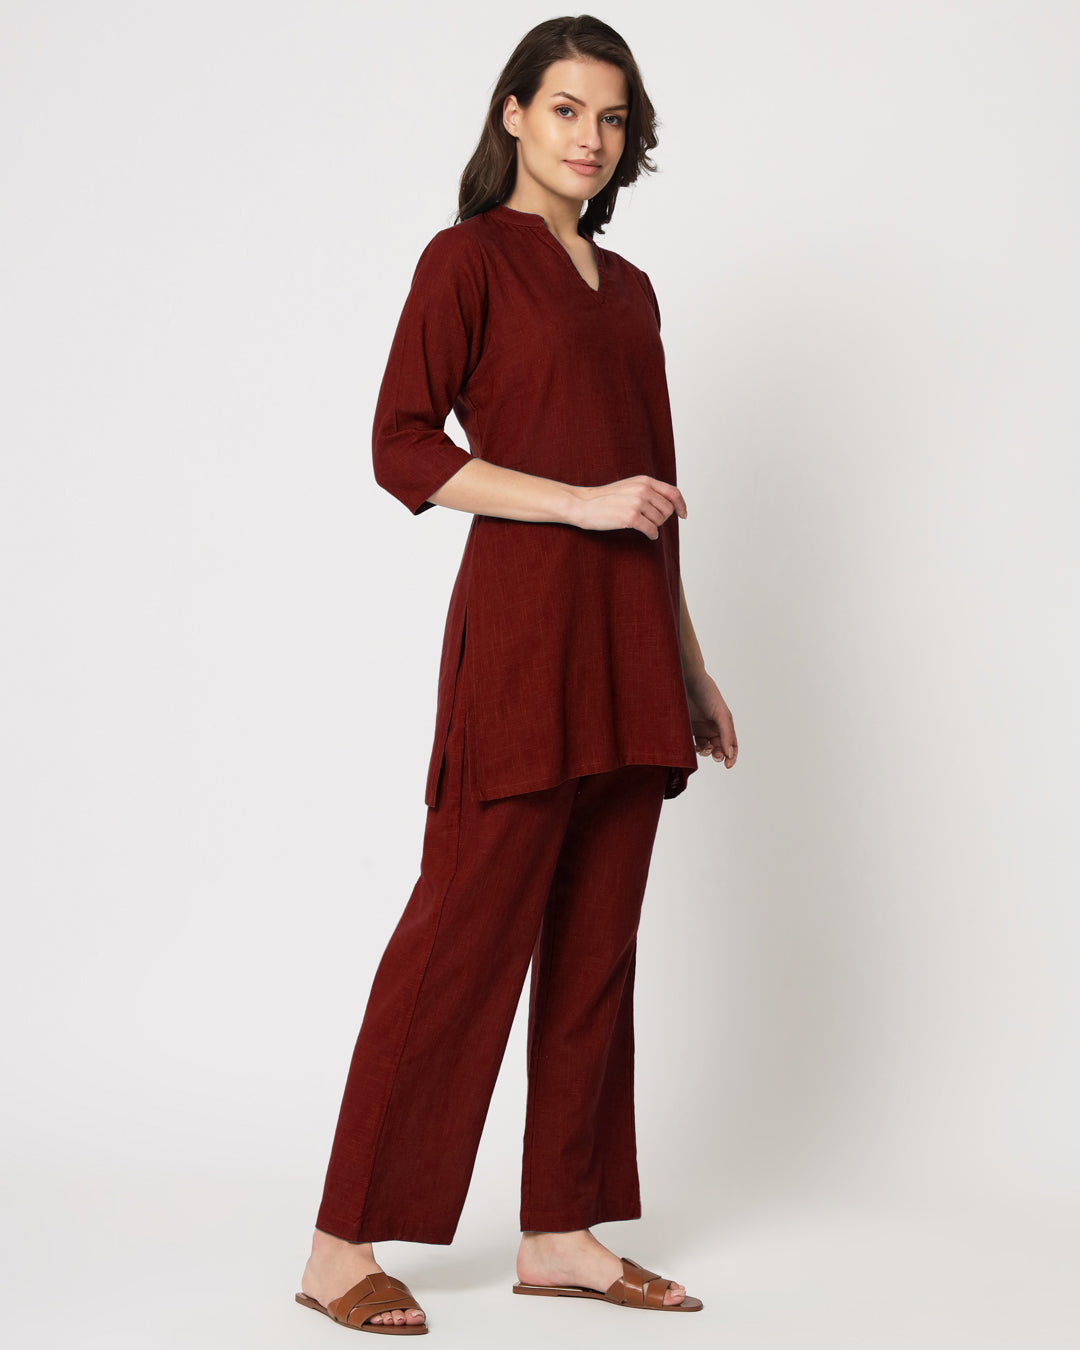 Russet Red Collar Neck Mid Length Solid Kurta (Without Bottoms)